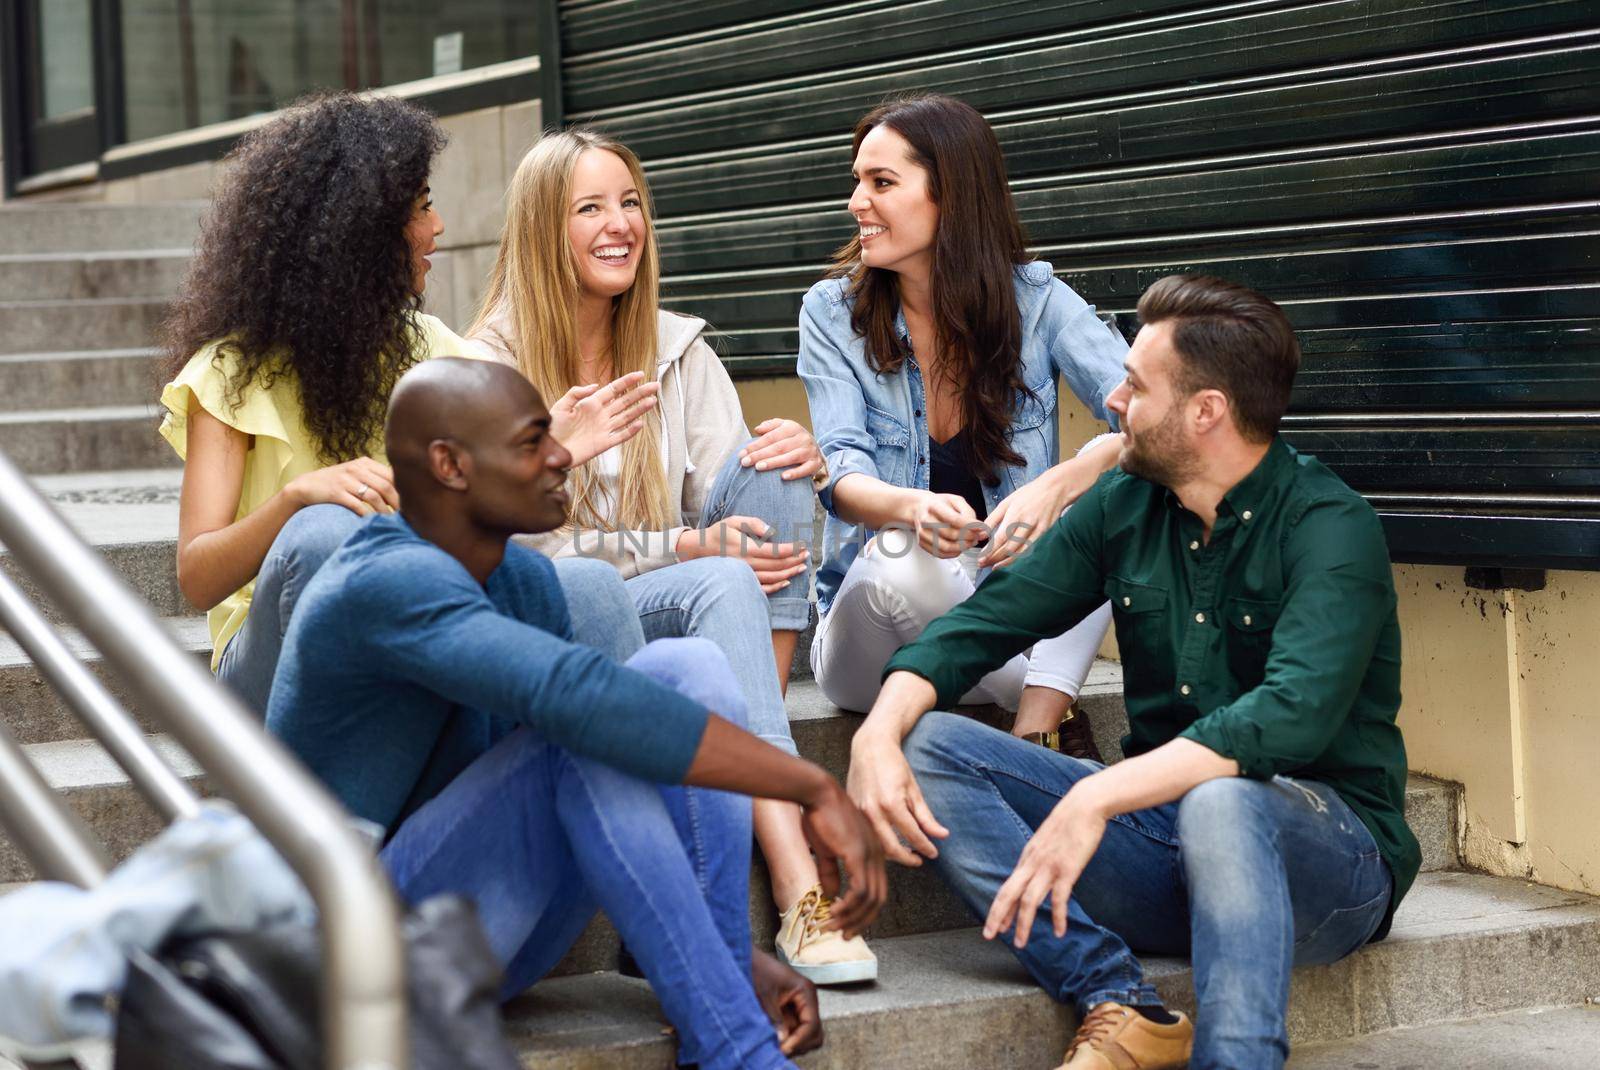 Multi-ethnic group of young people having fun together outdoors in urban background. group of men and woman sitting together on steps.